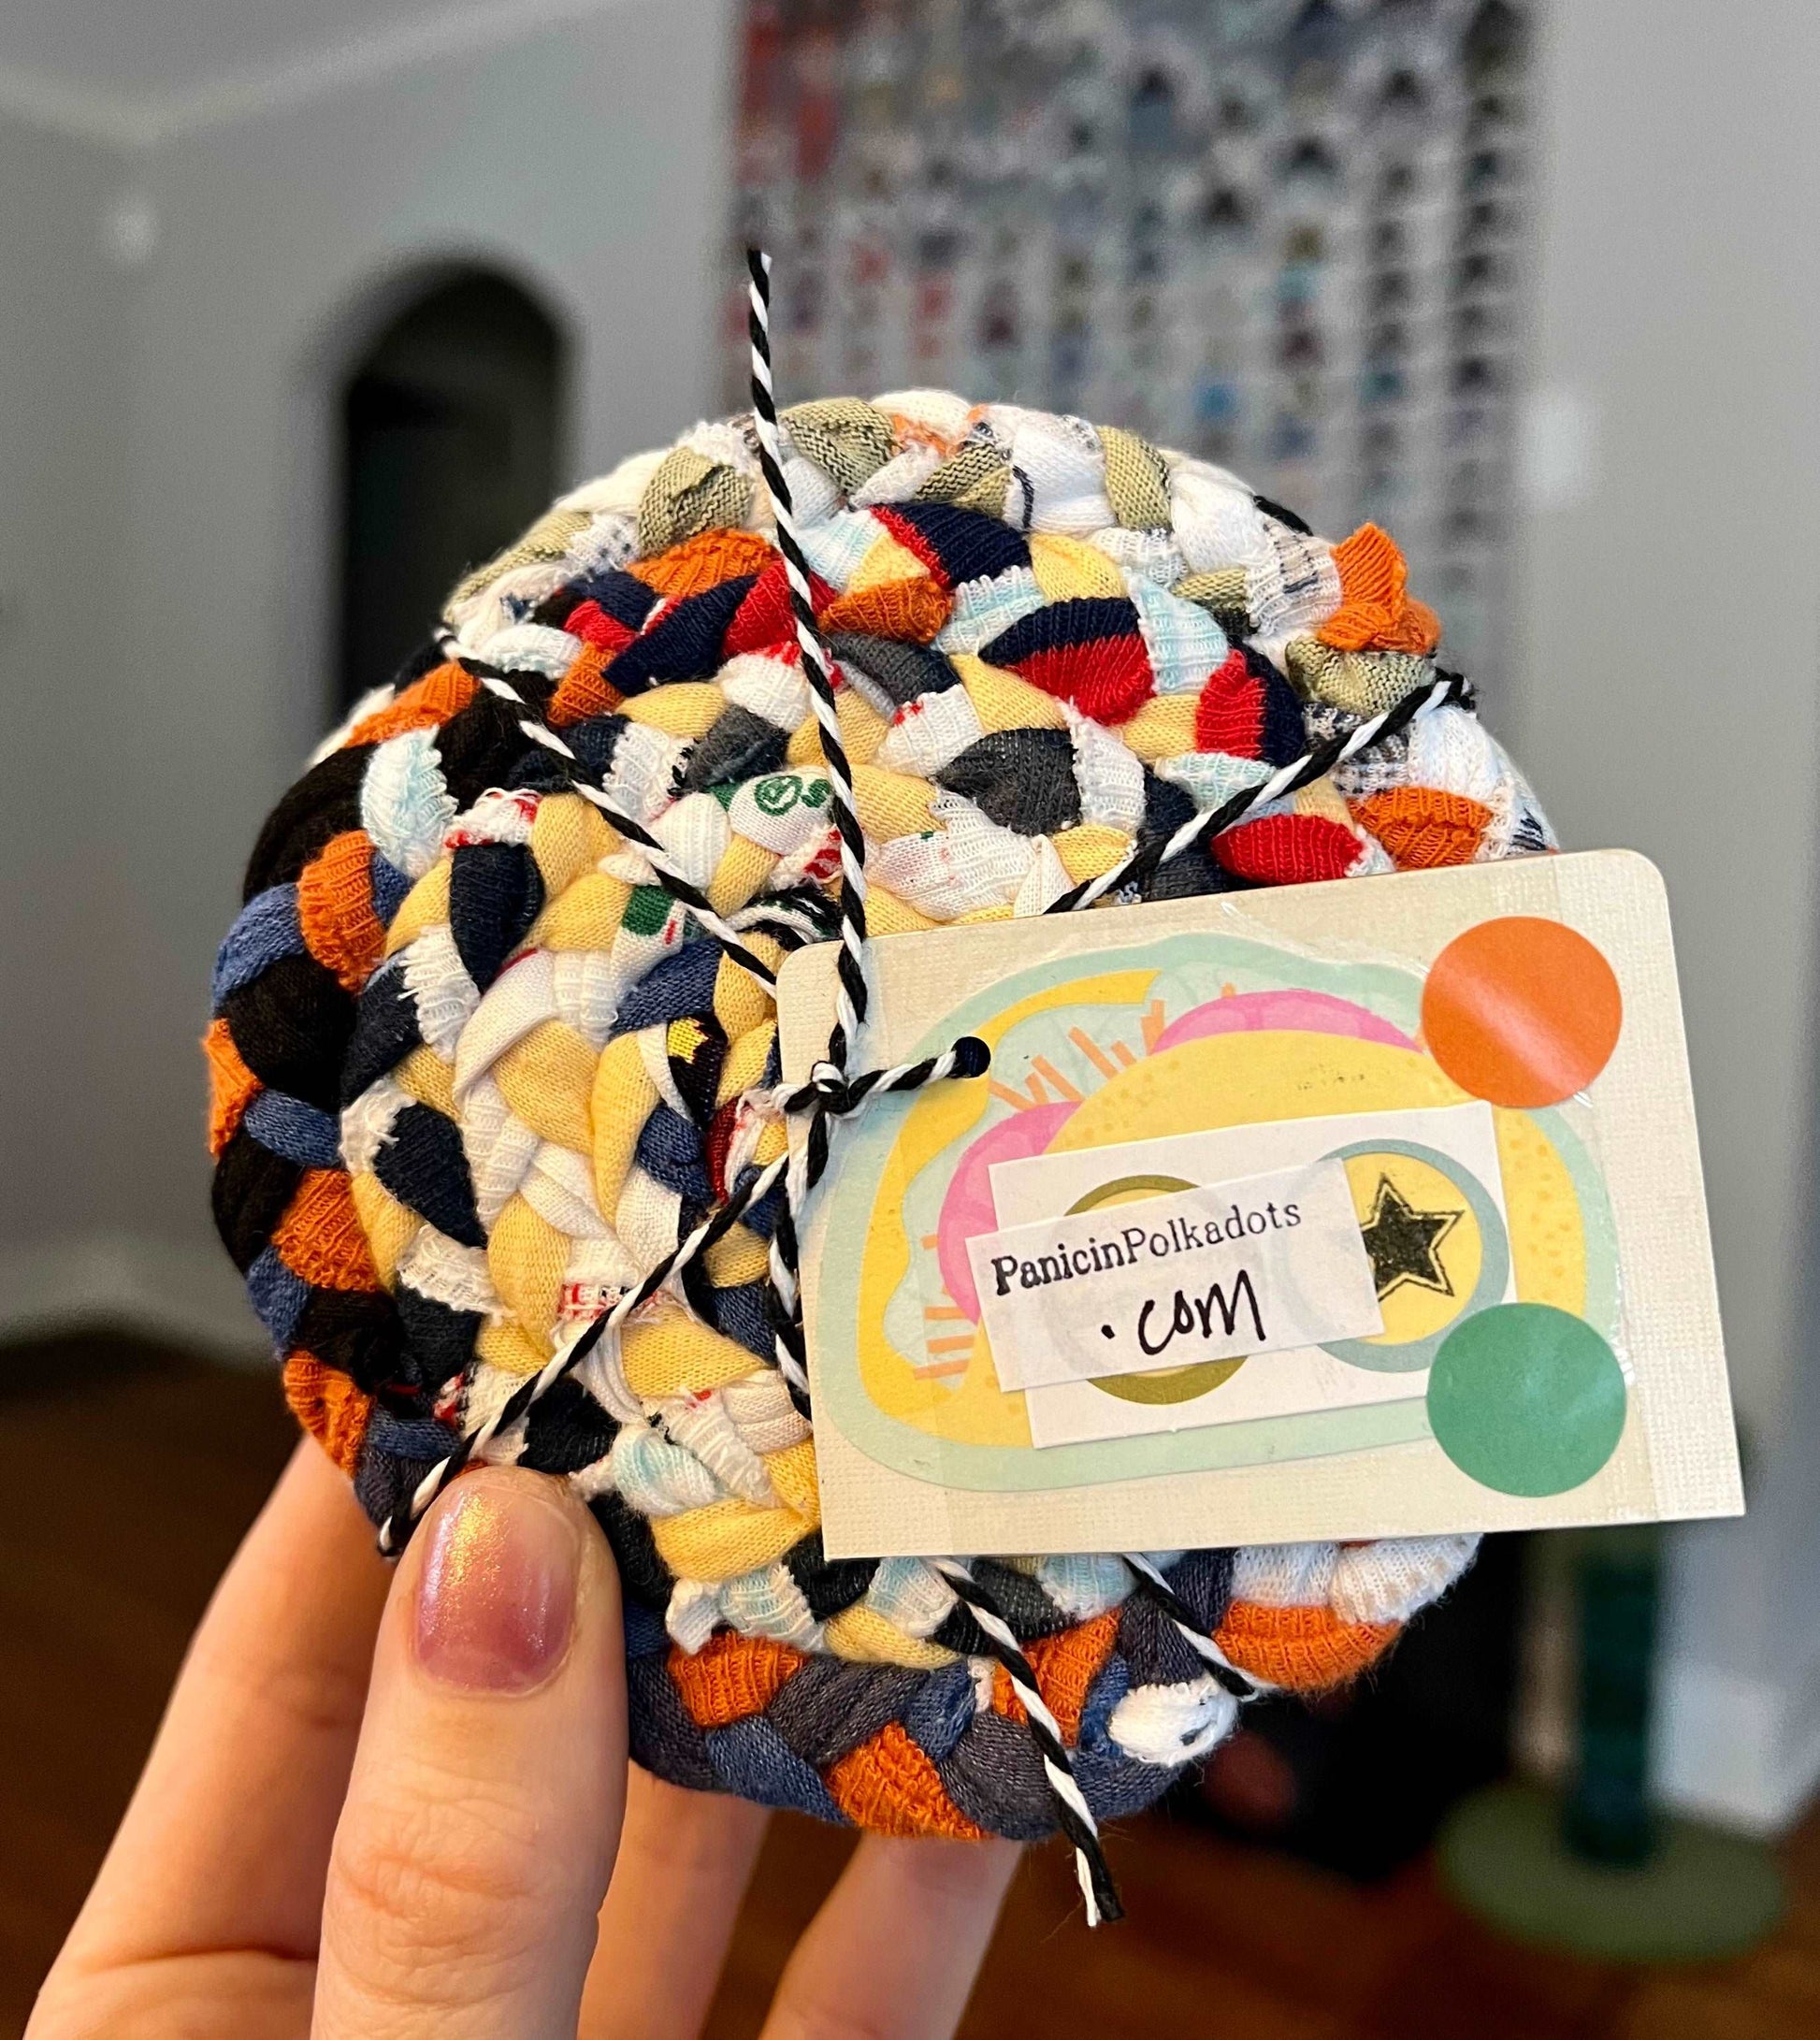 Mini rug coaster set, bound by string and a tag, held up by a hand, with a quilt in the background